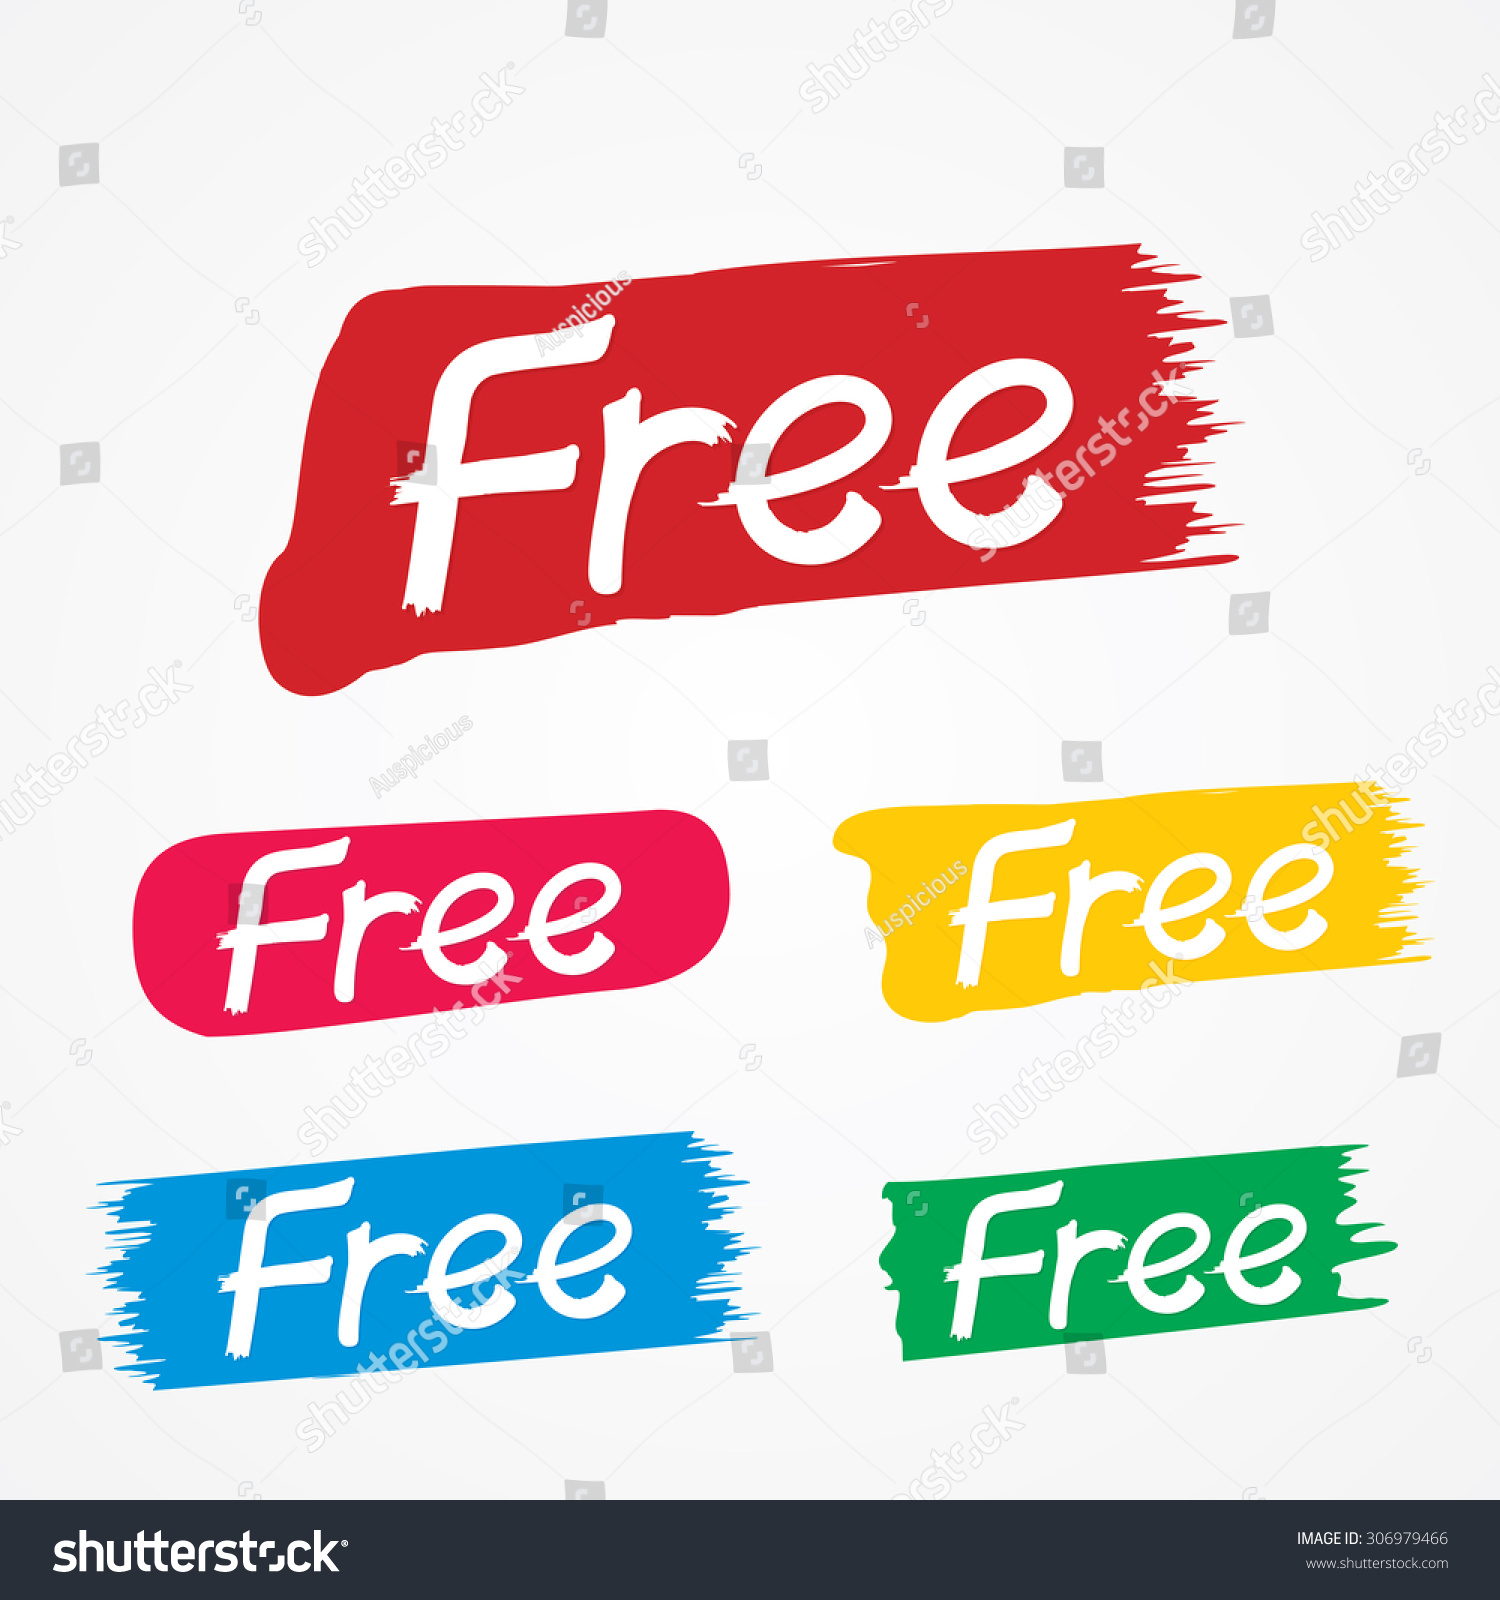 Download Vector Free Tag Free Sign Free Stock Vector Royalty Free 306979466